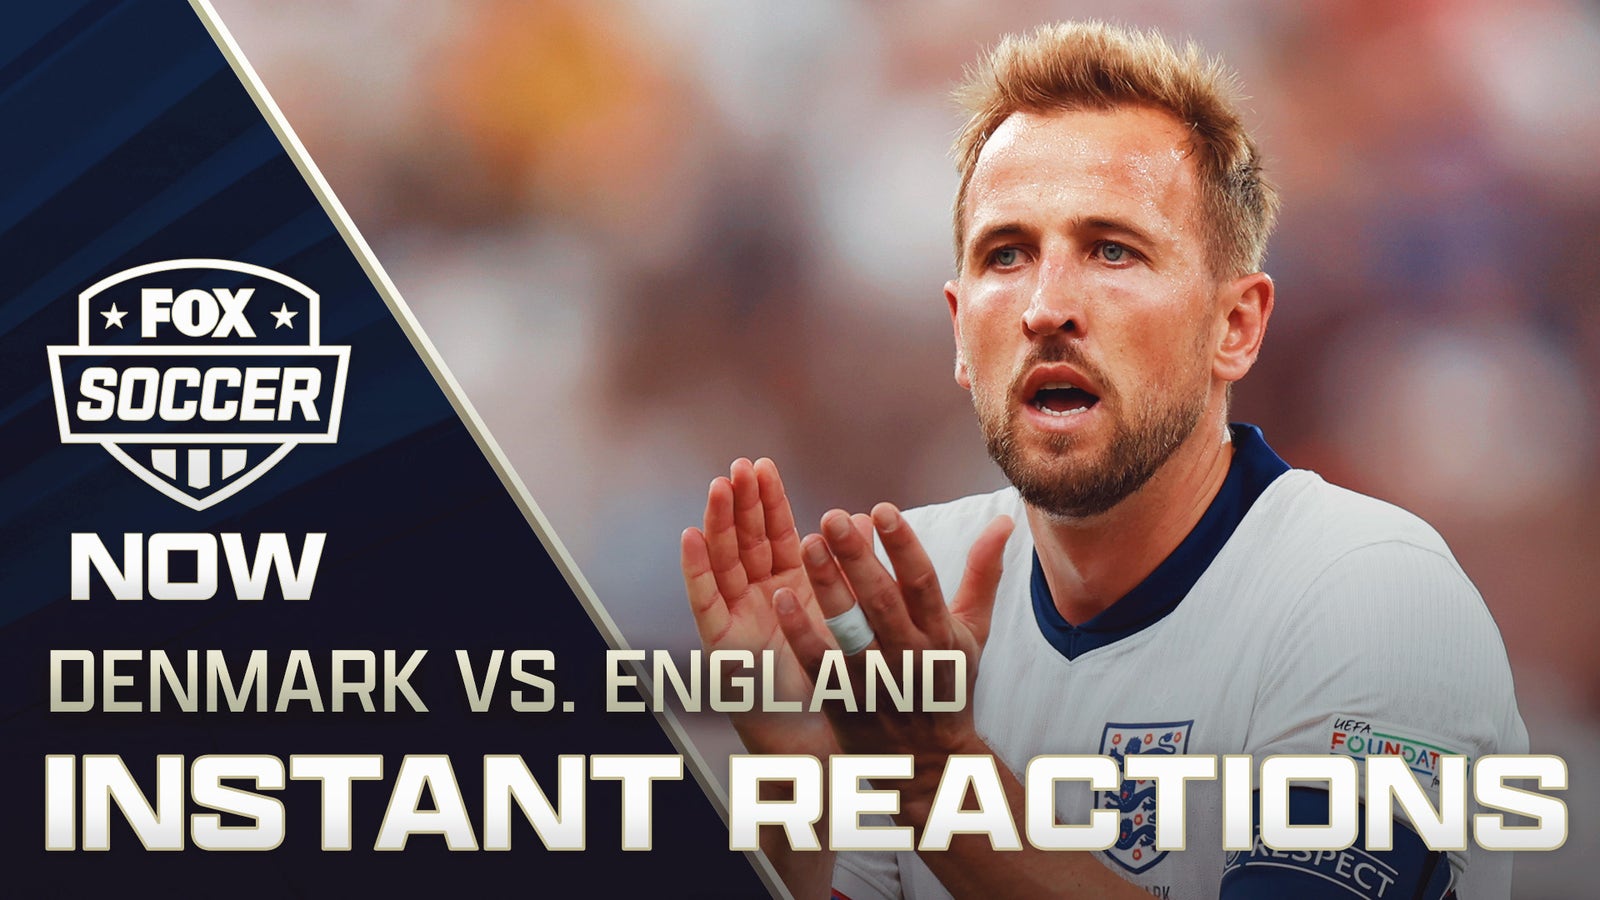 Denmark vs. England Reaction: Is it coming home? | FOX Soccer NOW